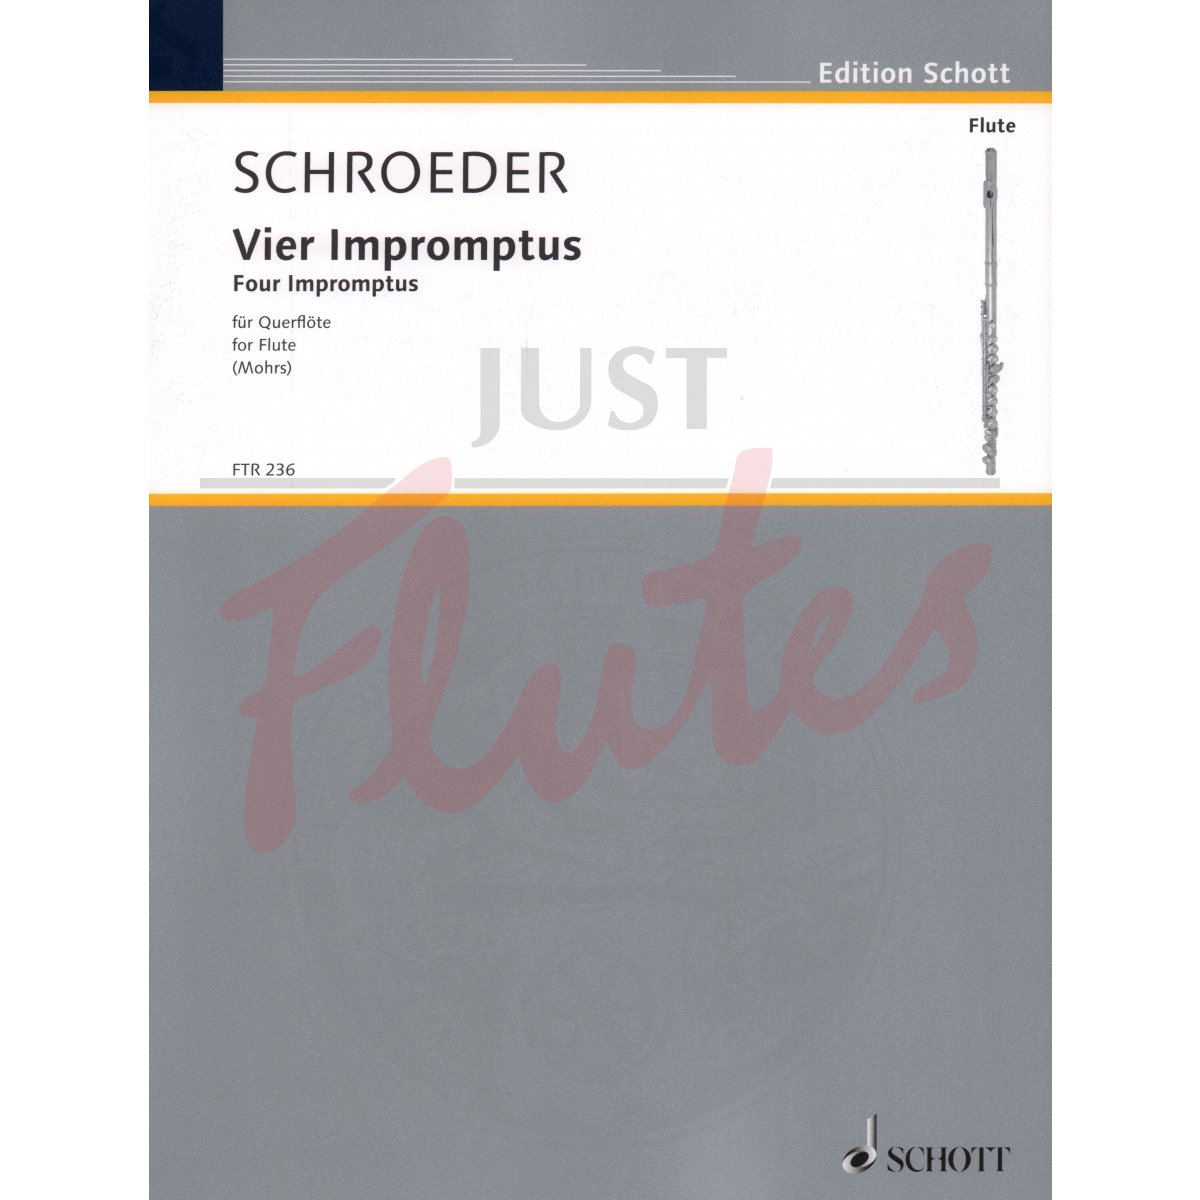 Four Impromptus for Solo Flute